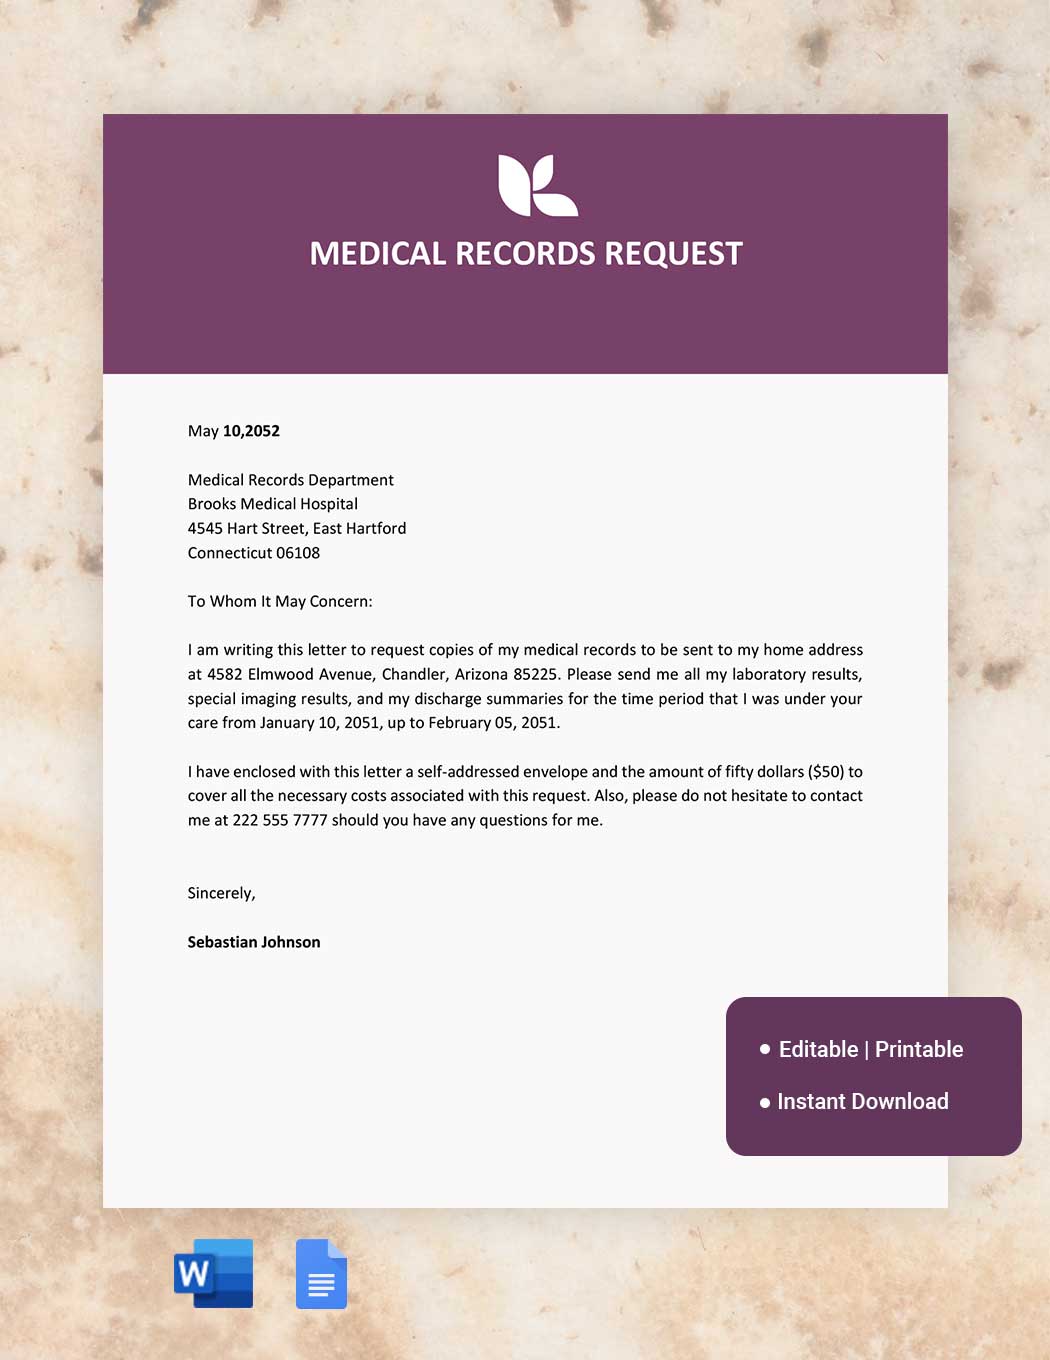 Medical Records Request Example in Word, Google Docs